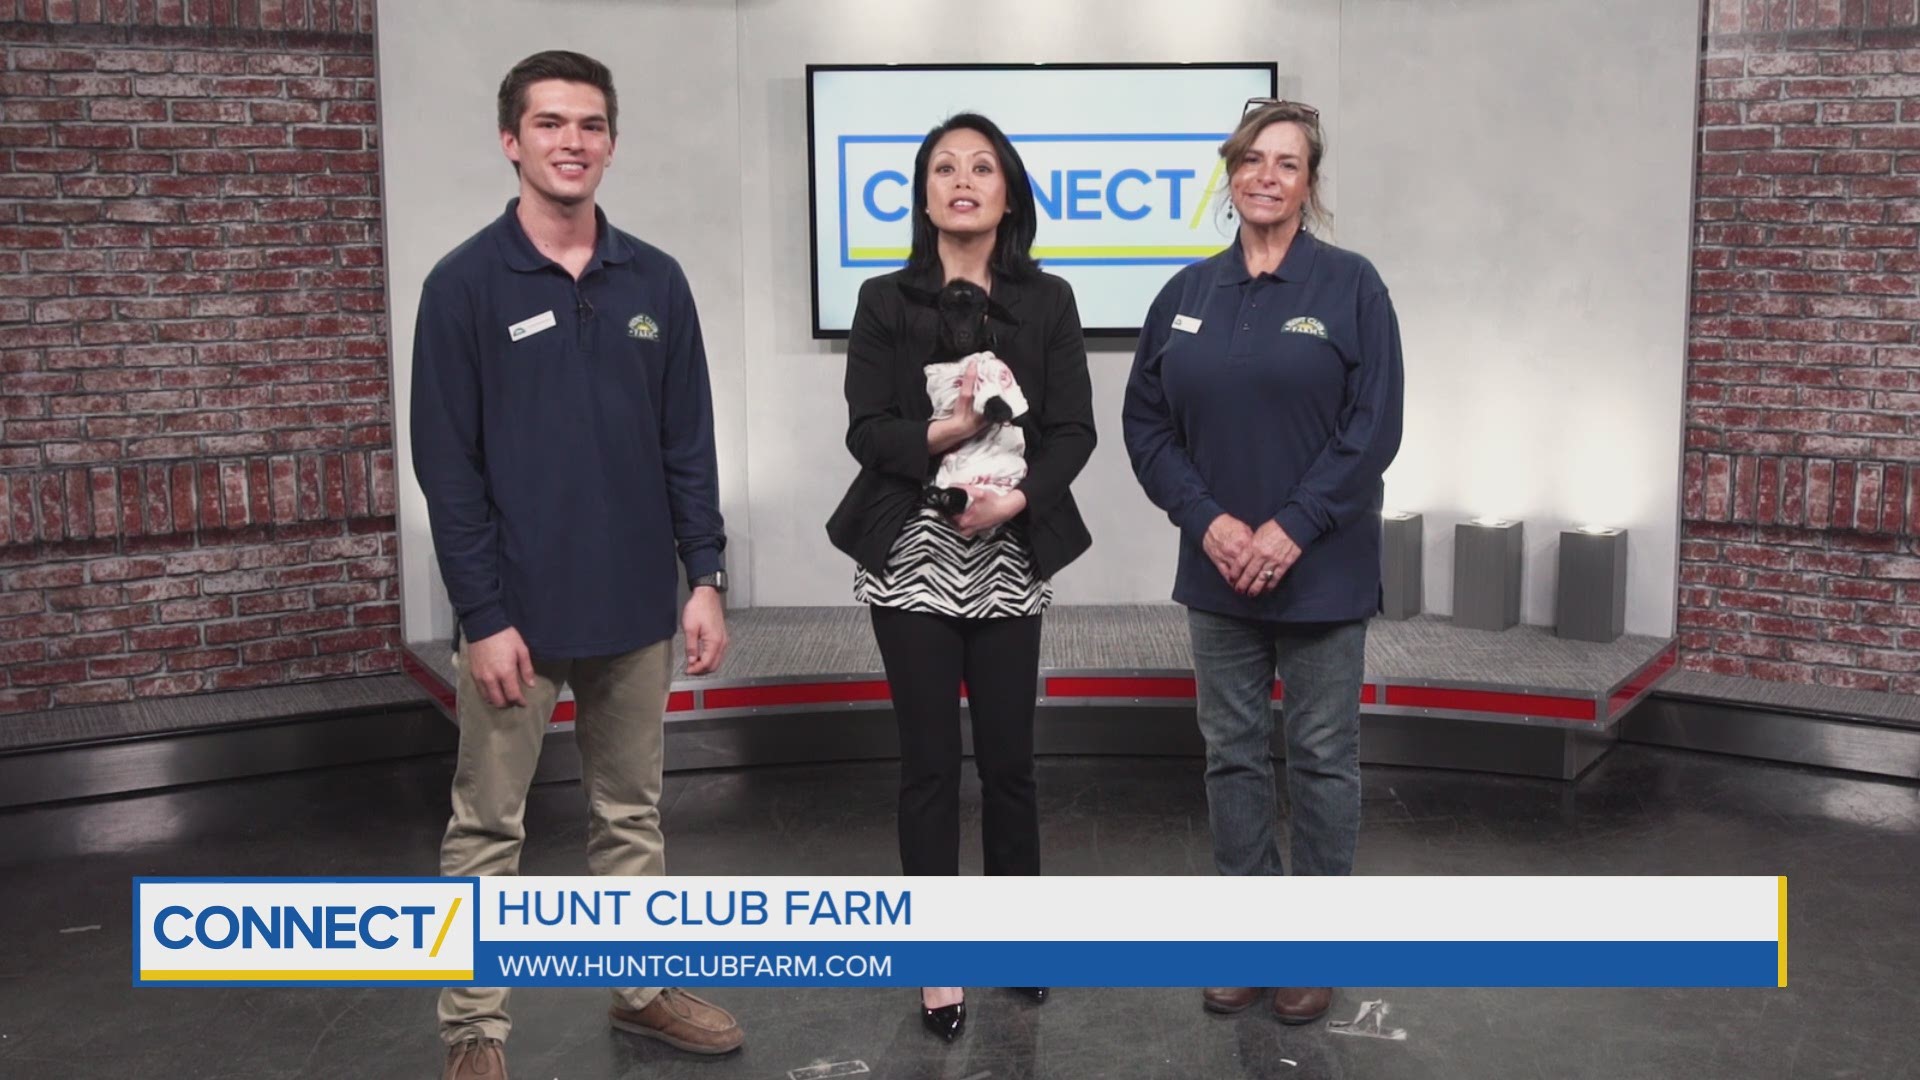 Hunt Club Farm brought a special guest and told us about their summer camp program.